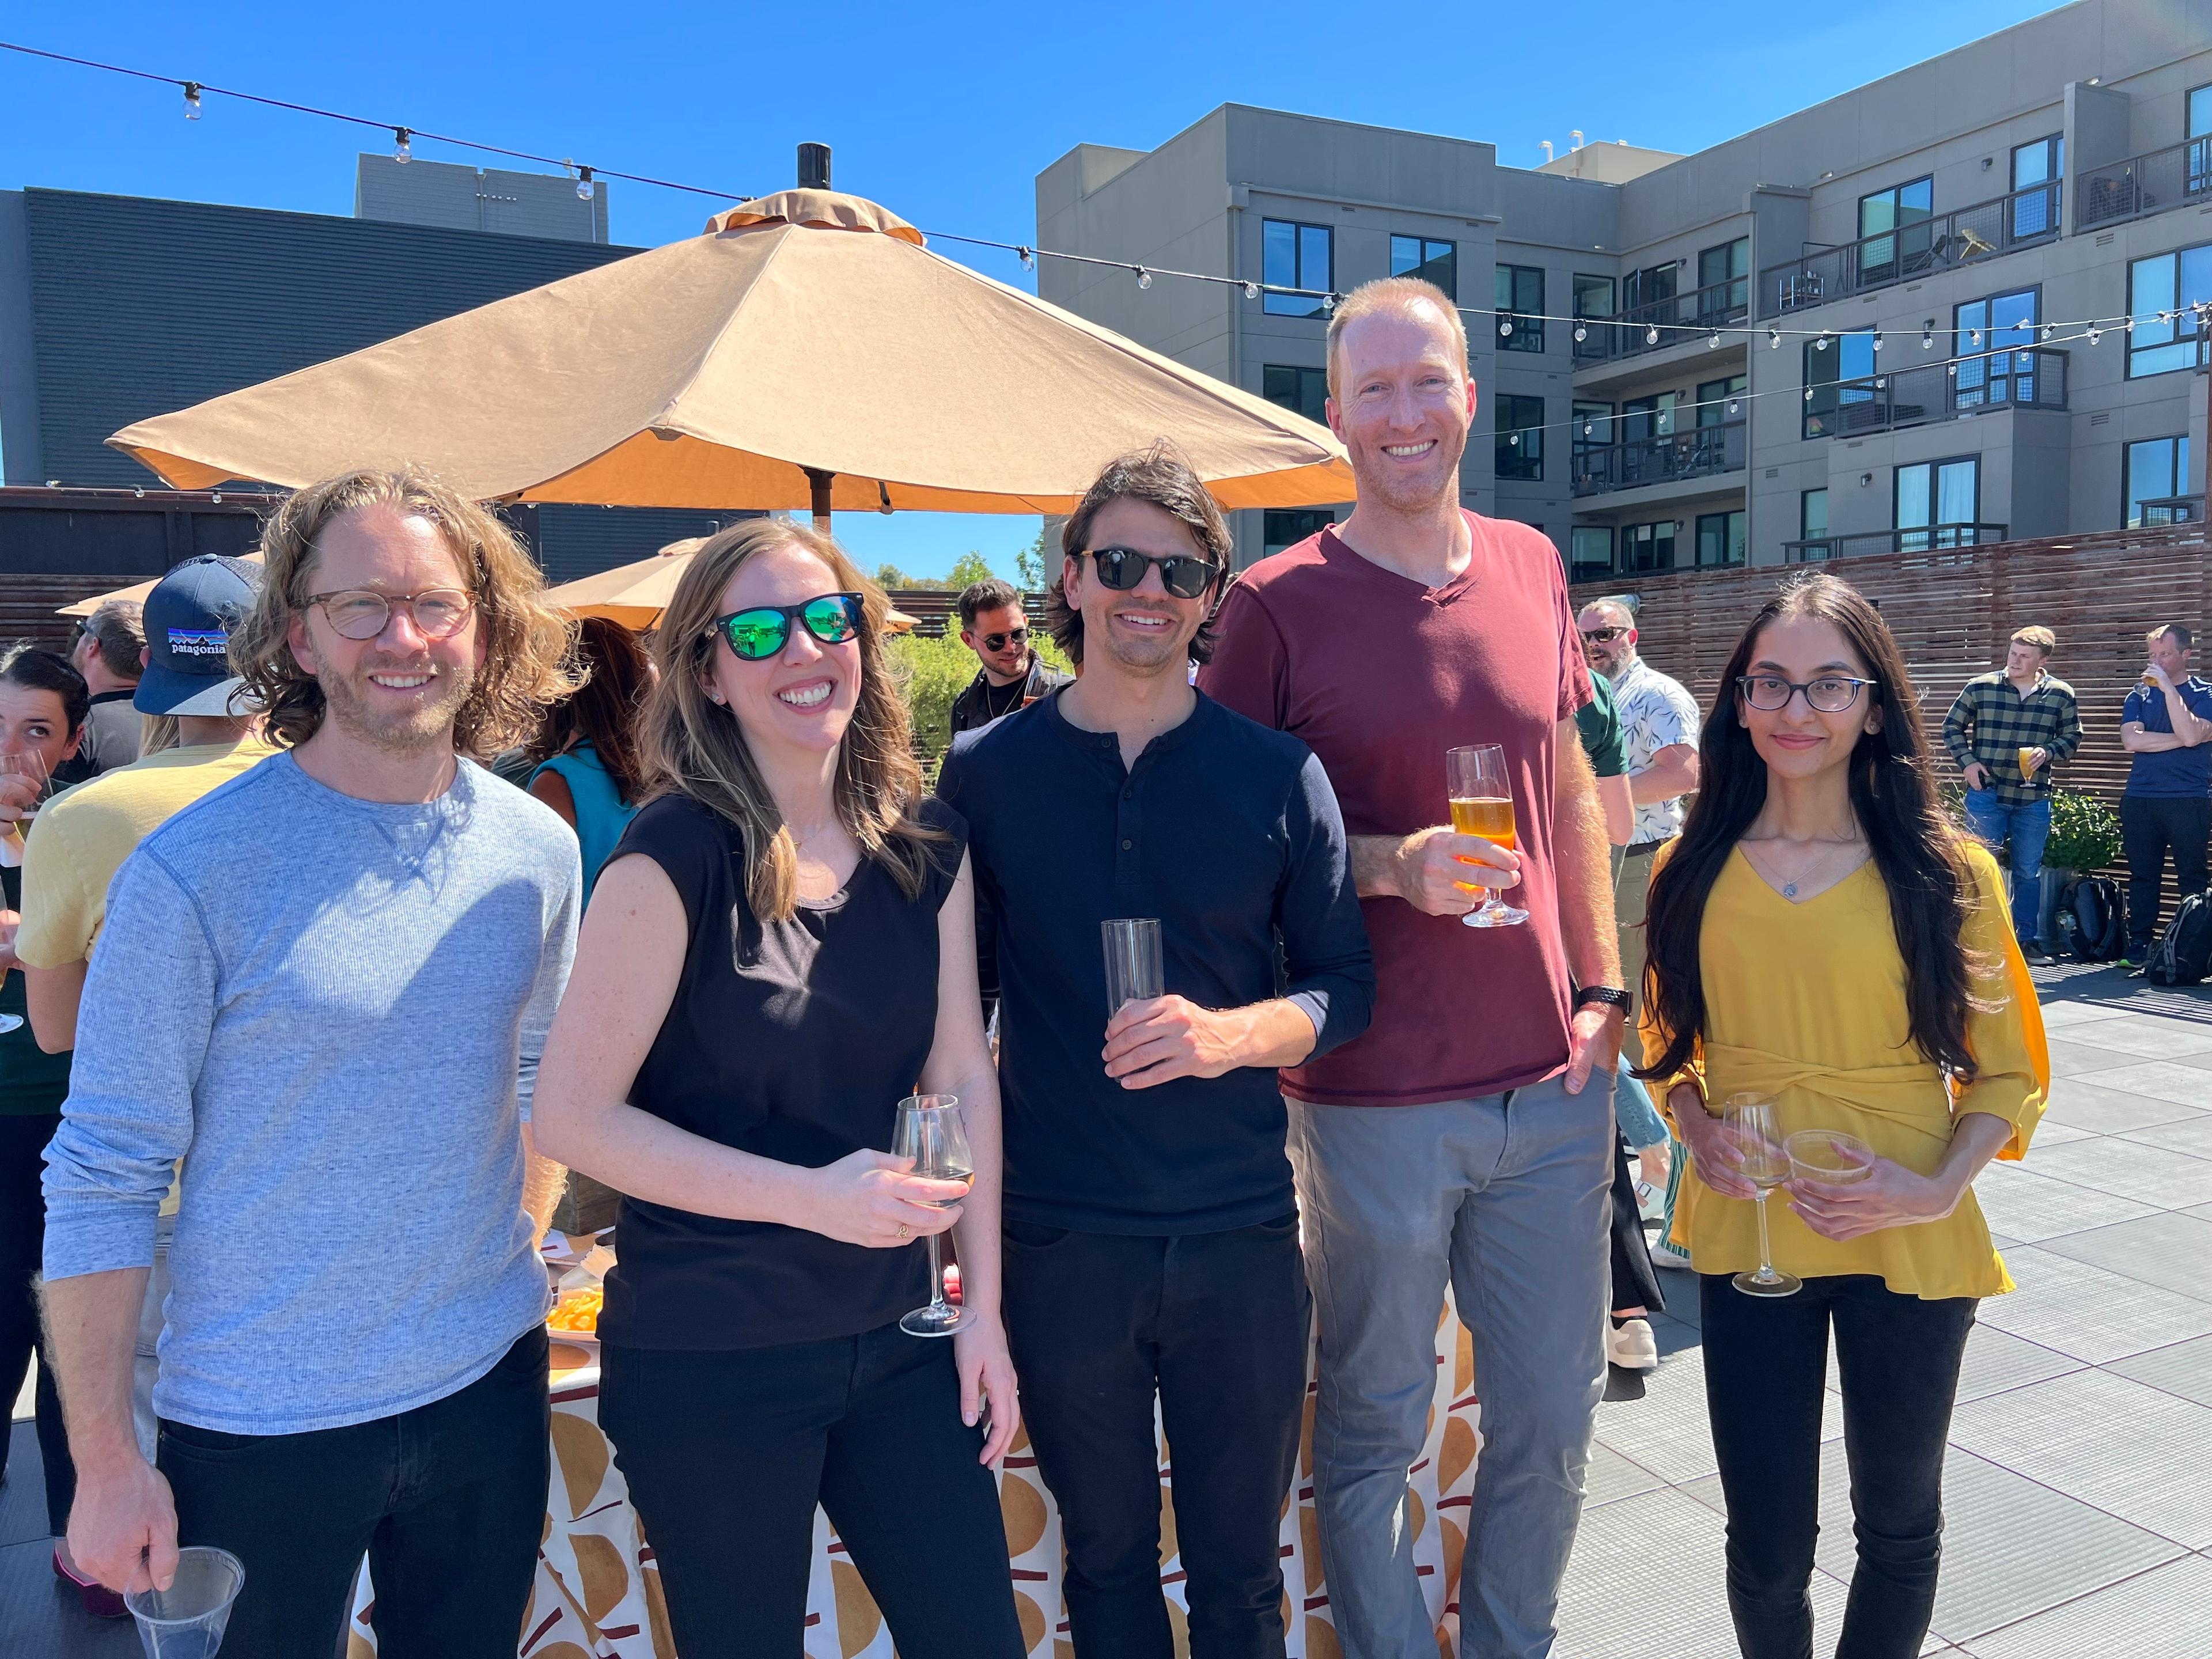 A group of people smiling holding drinks on a rooftop patio.